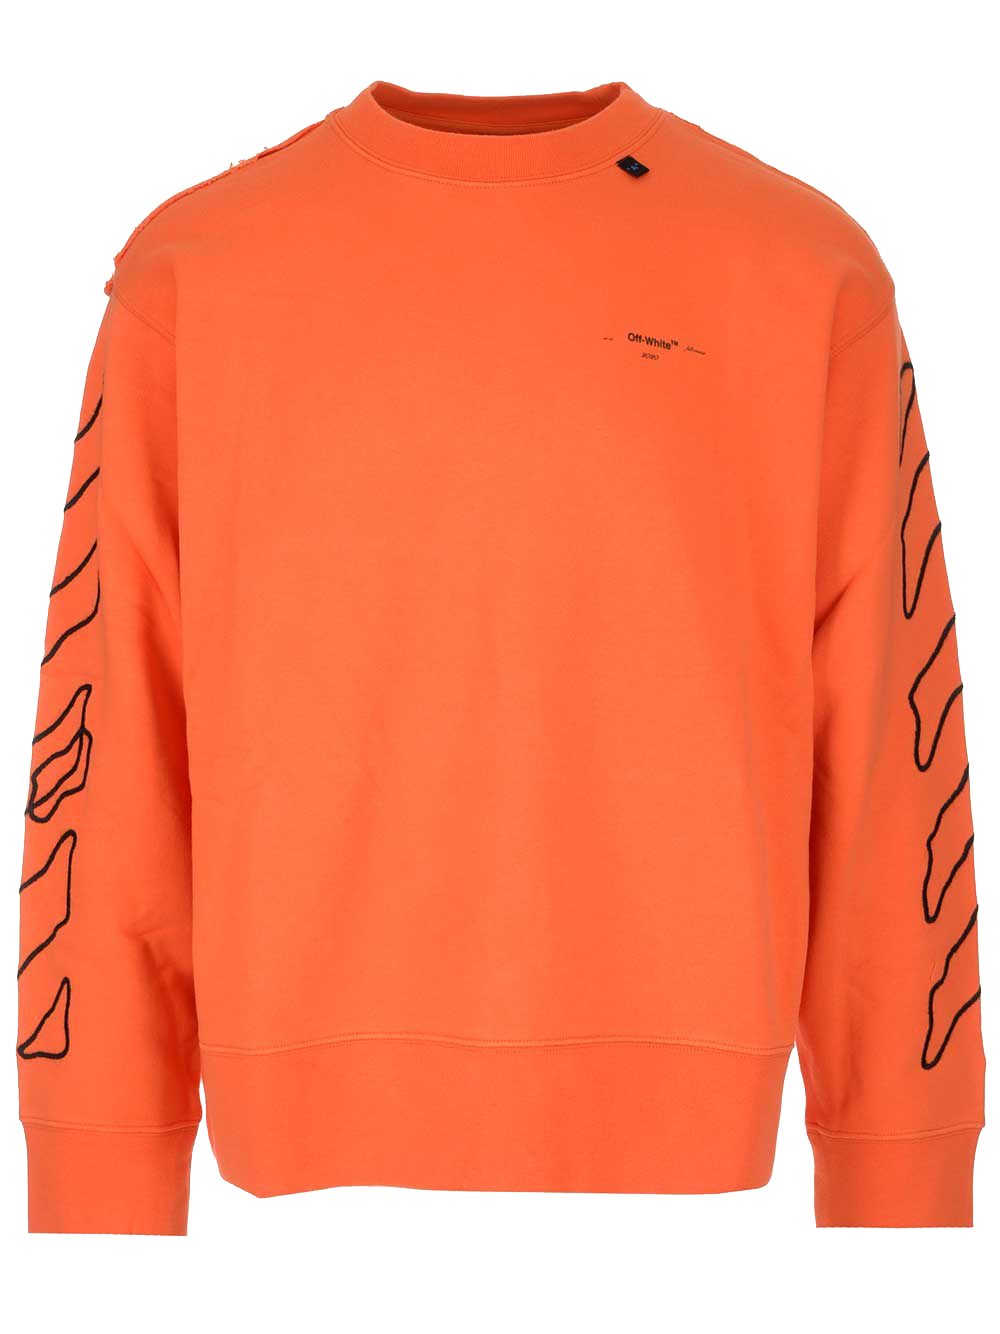 OFF-WHITE Oversized Abstract Arrows Embroidered T-Shirt Orange/Black